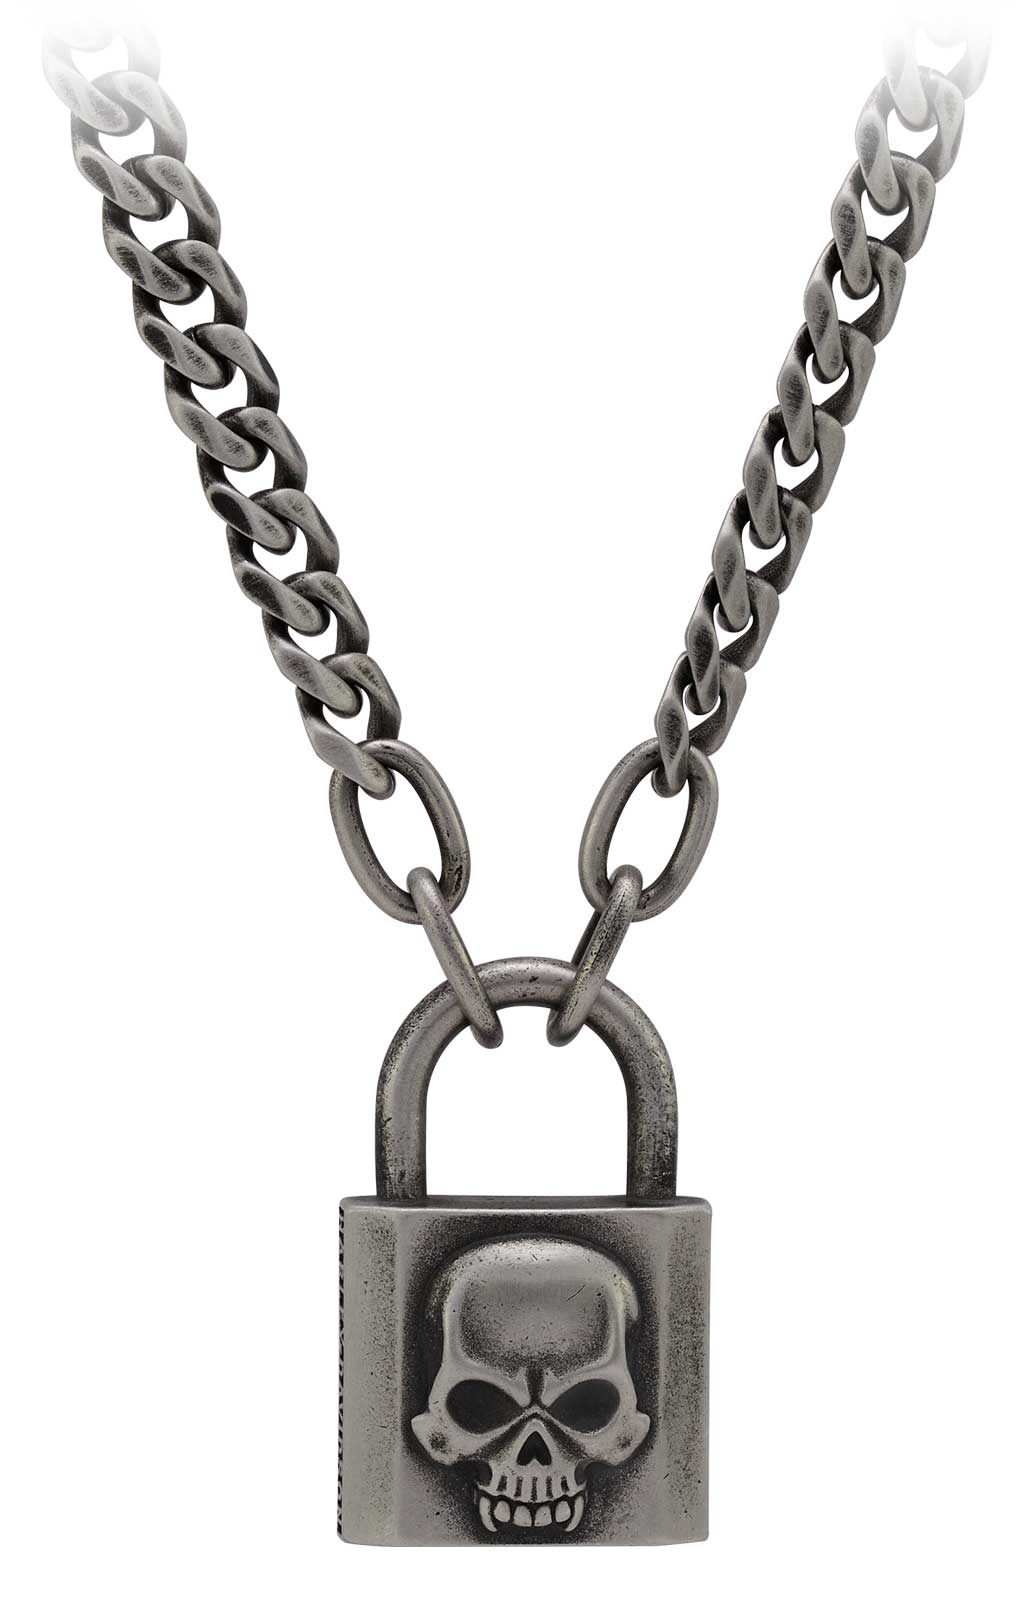 padlock chain necklace